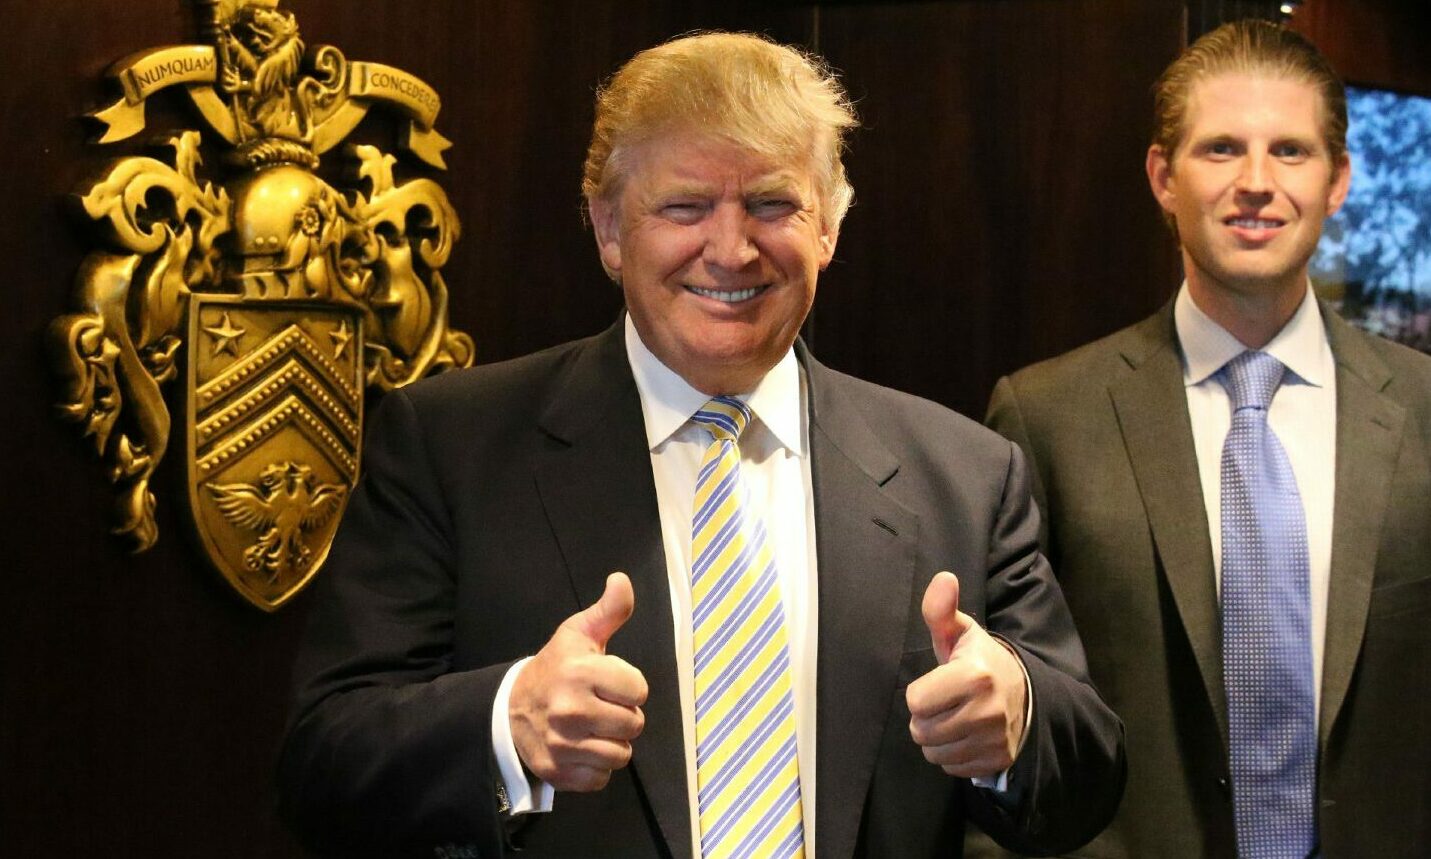 Donald Trump and his son Eric with the family crest after unveiling the multi-million pound refurbishment of the Trump Turnberry clubhouse.